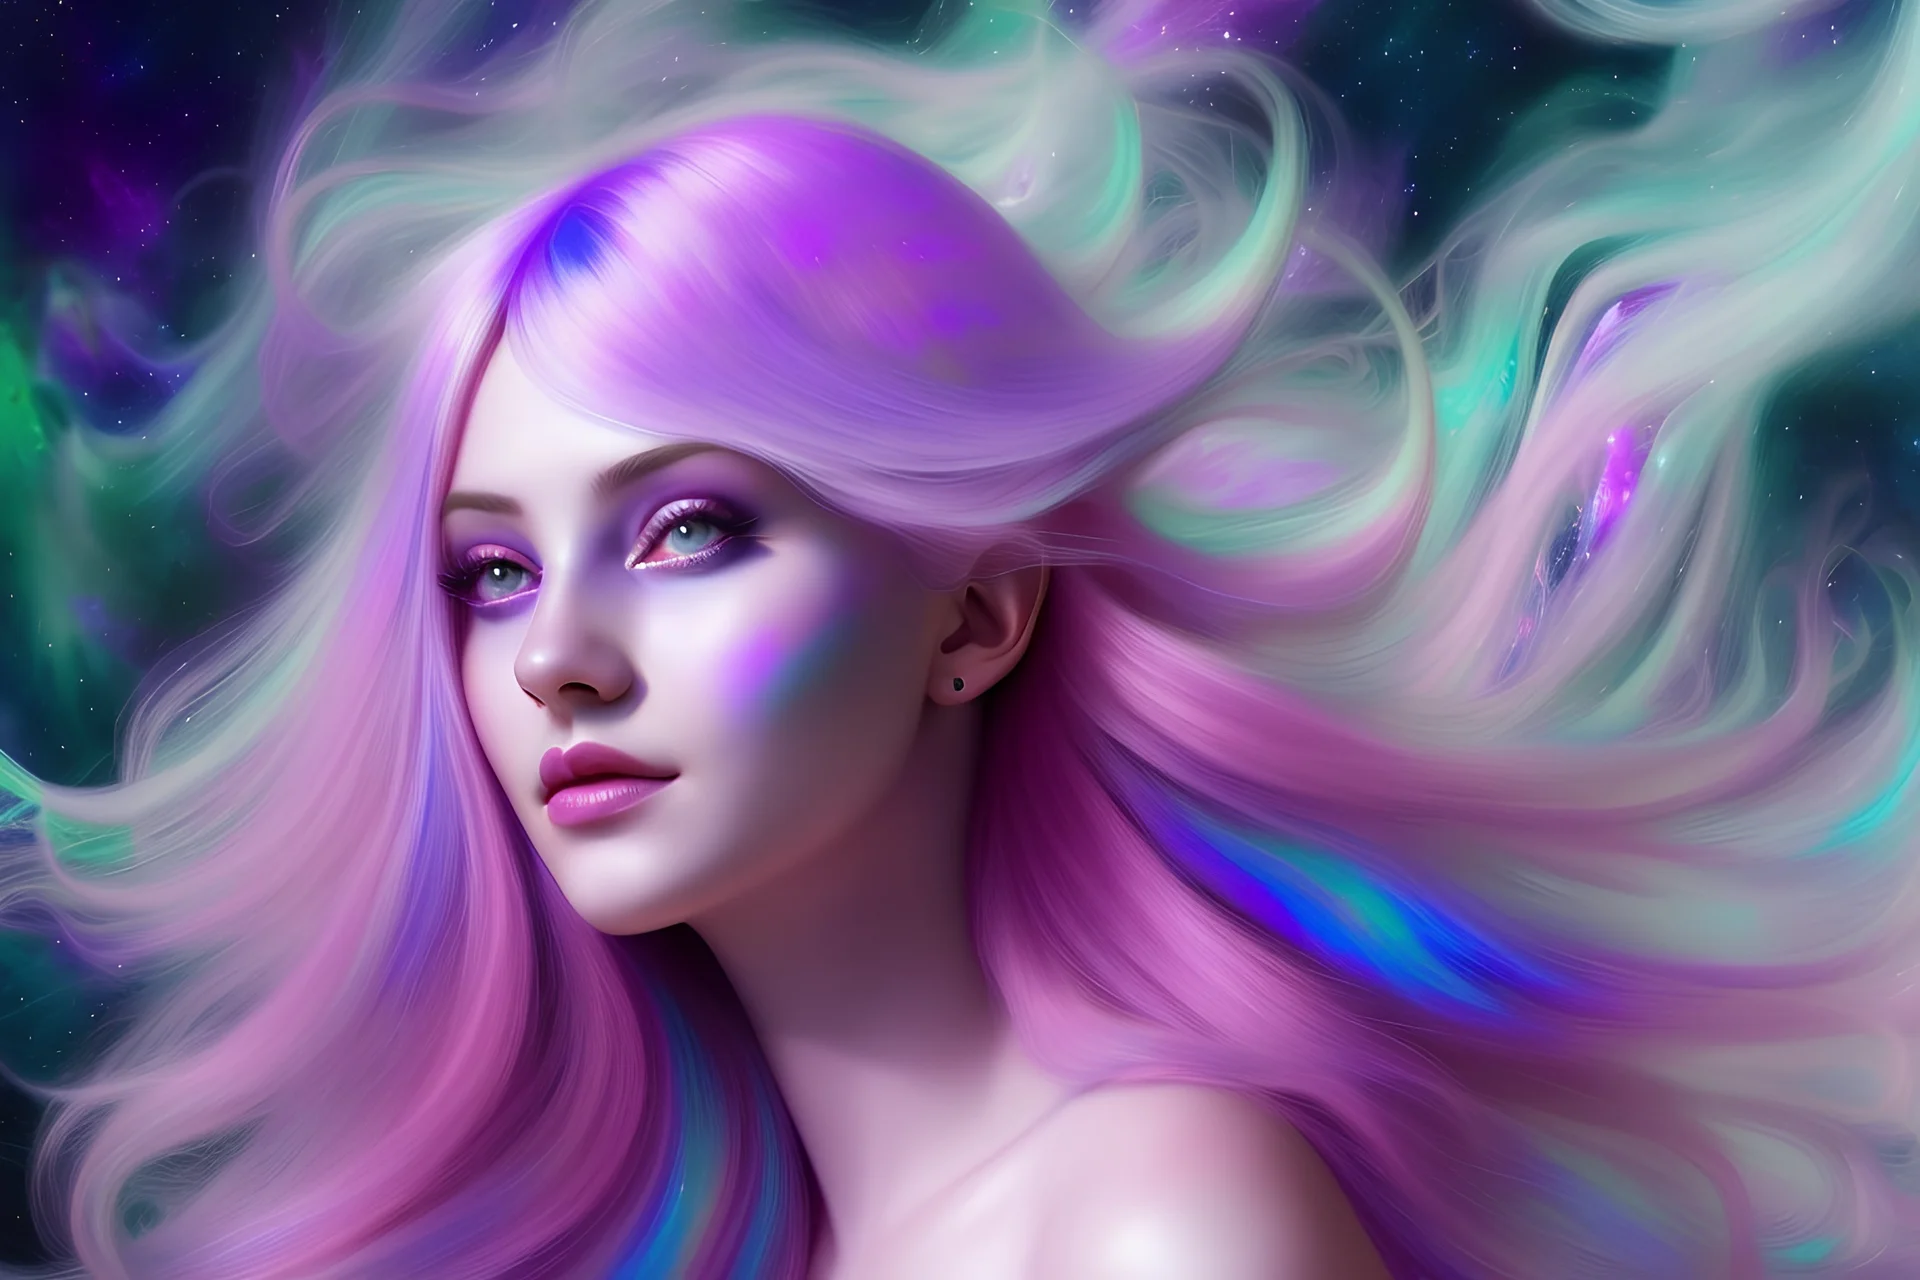 Beautiful woman with lavender hair in a photorealistic portrait style in front of a swirling psychedelic cosmic galaxy background with multicolor lights and swirls